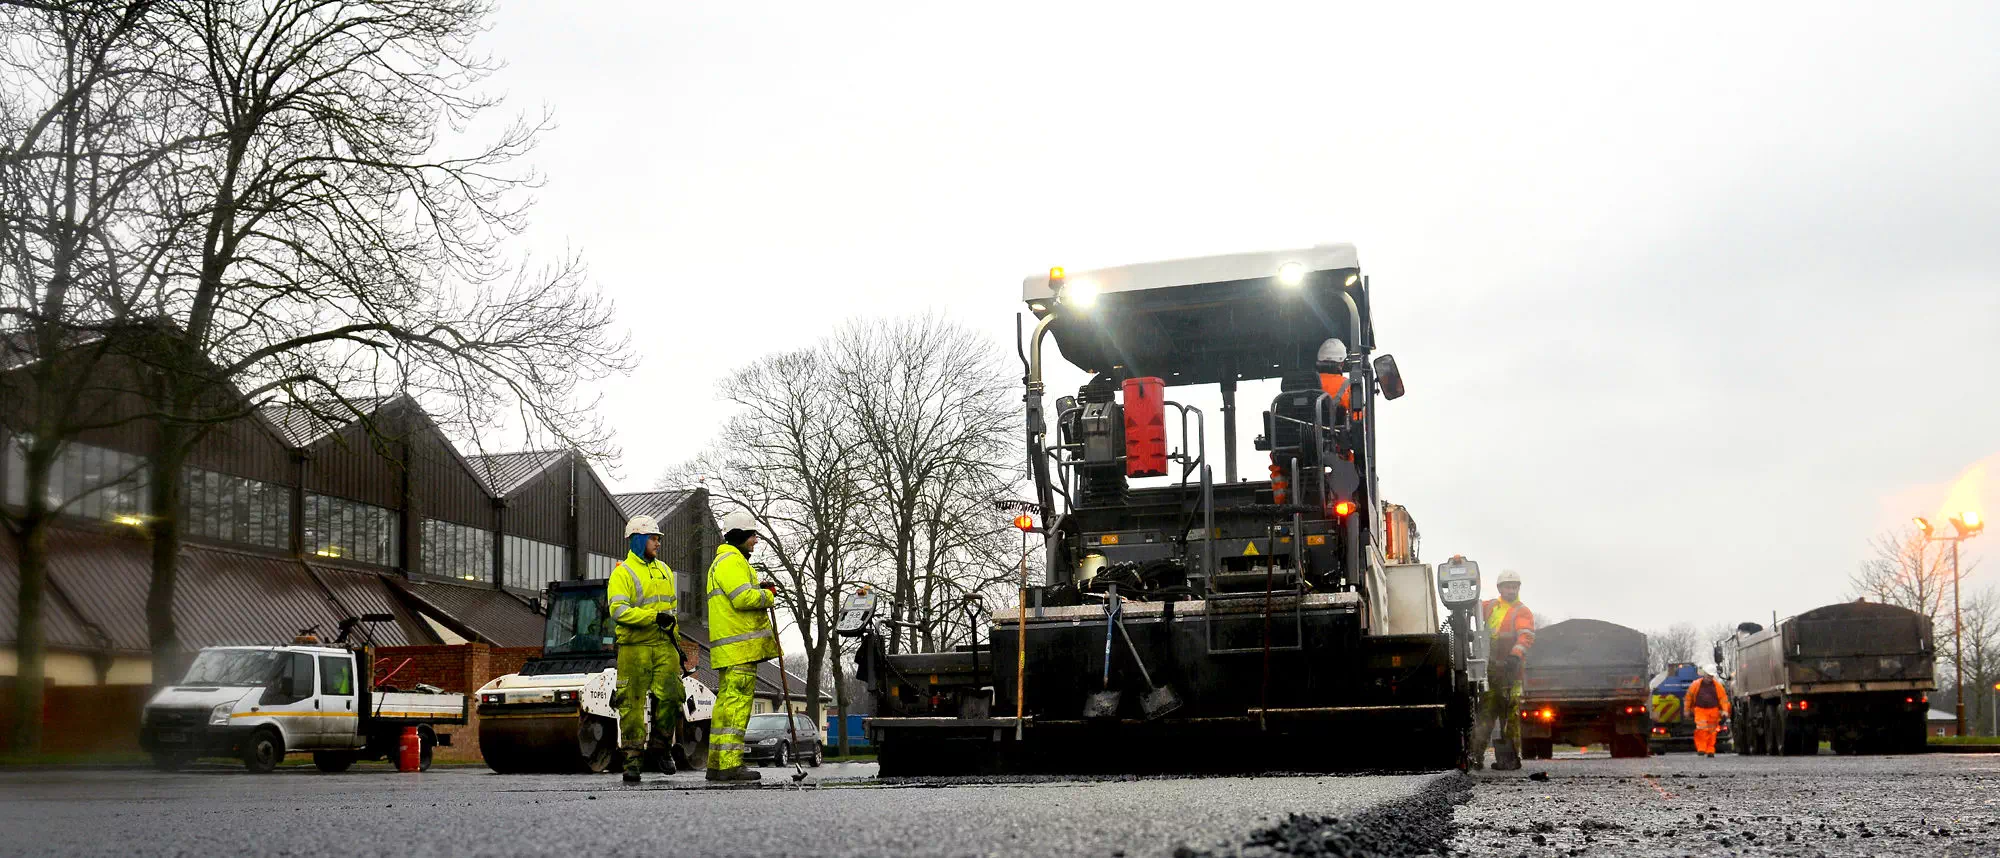 Management and organisation of road works, large or small, can be hard work, especially in terms of communication. For any business, the aim is to provide the best service possible and be on time, so the ability to hire a wireless radio brings great support and really helps the system.